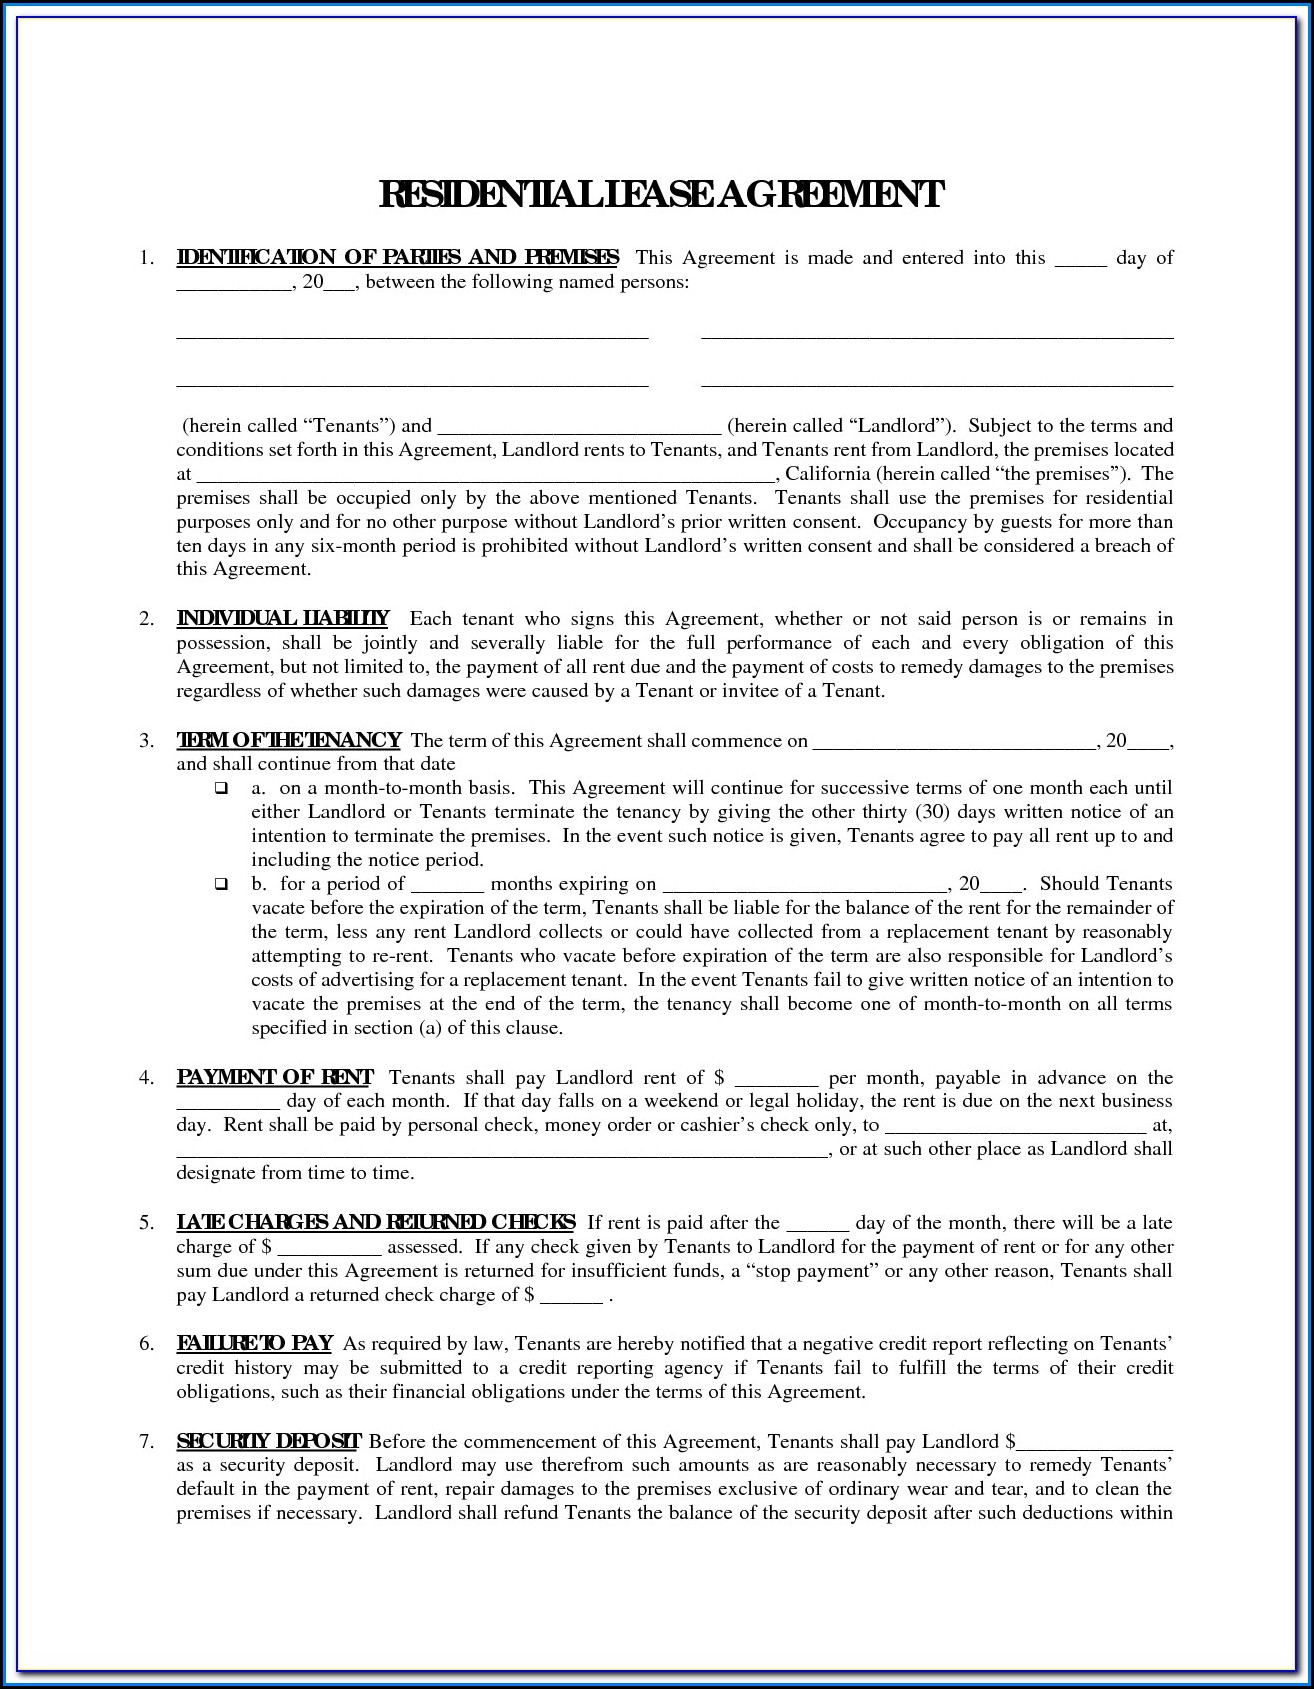 free-printable-rental-agreement-forms-in-spanish-form-resume